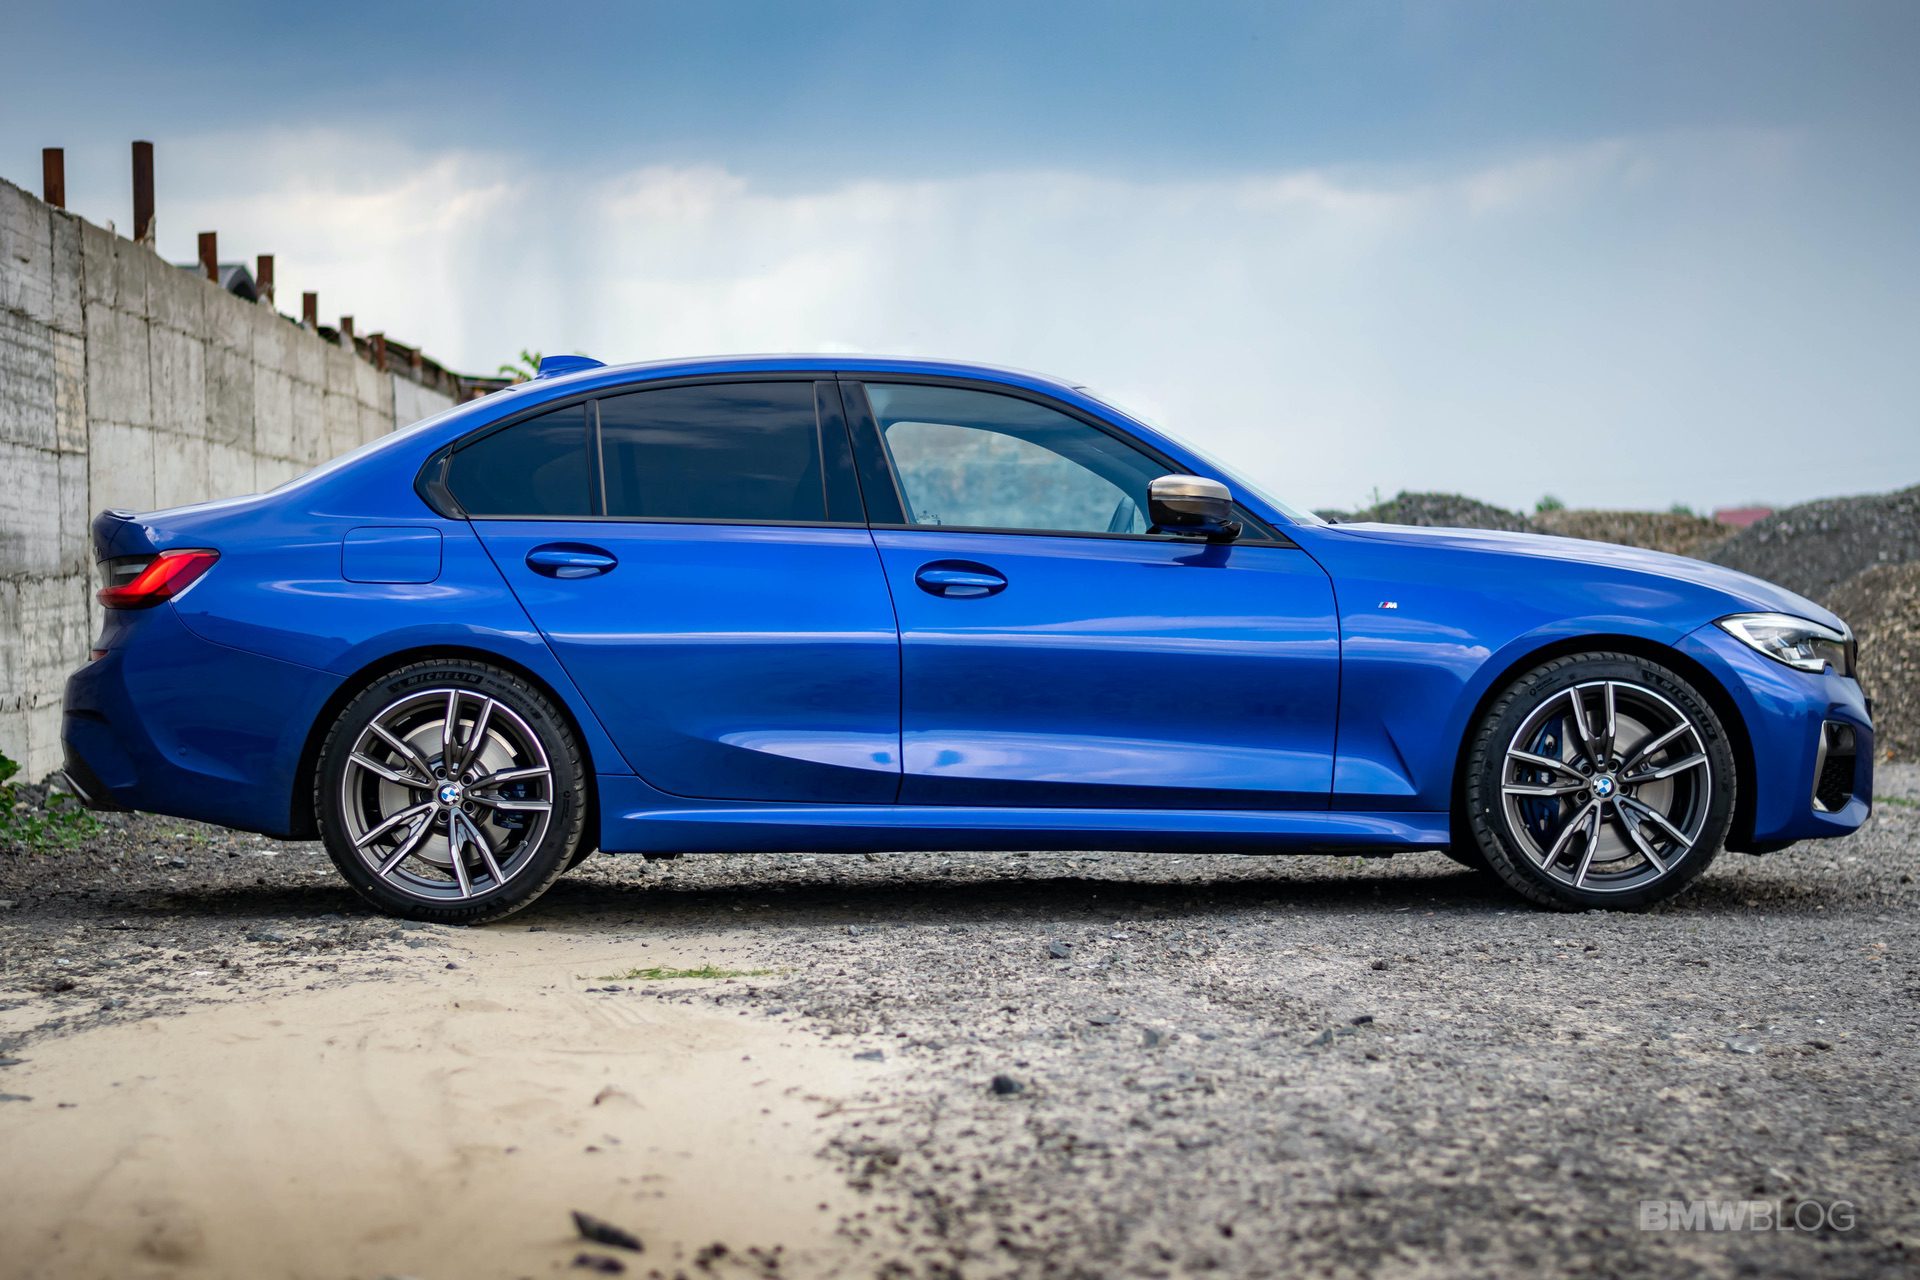 TEST DRIVE: 2020 BMW M340i xDrive – The Sweet Spot Of Comfort And